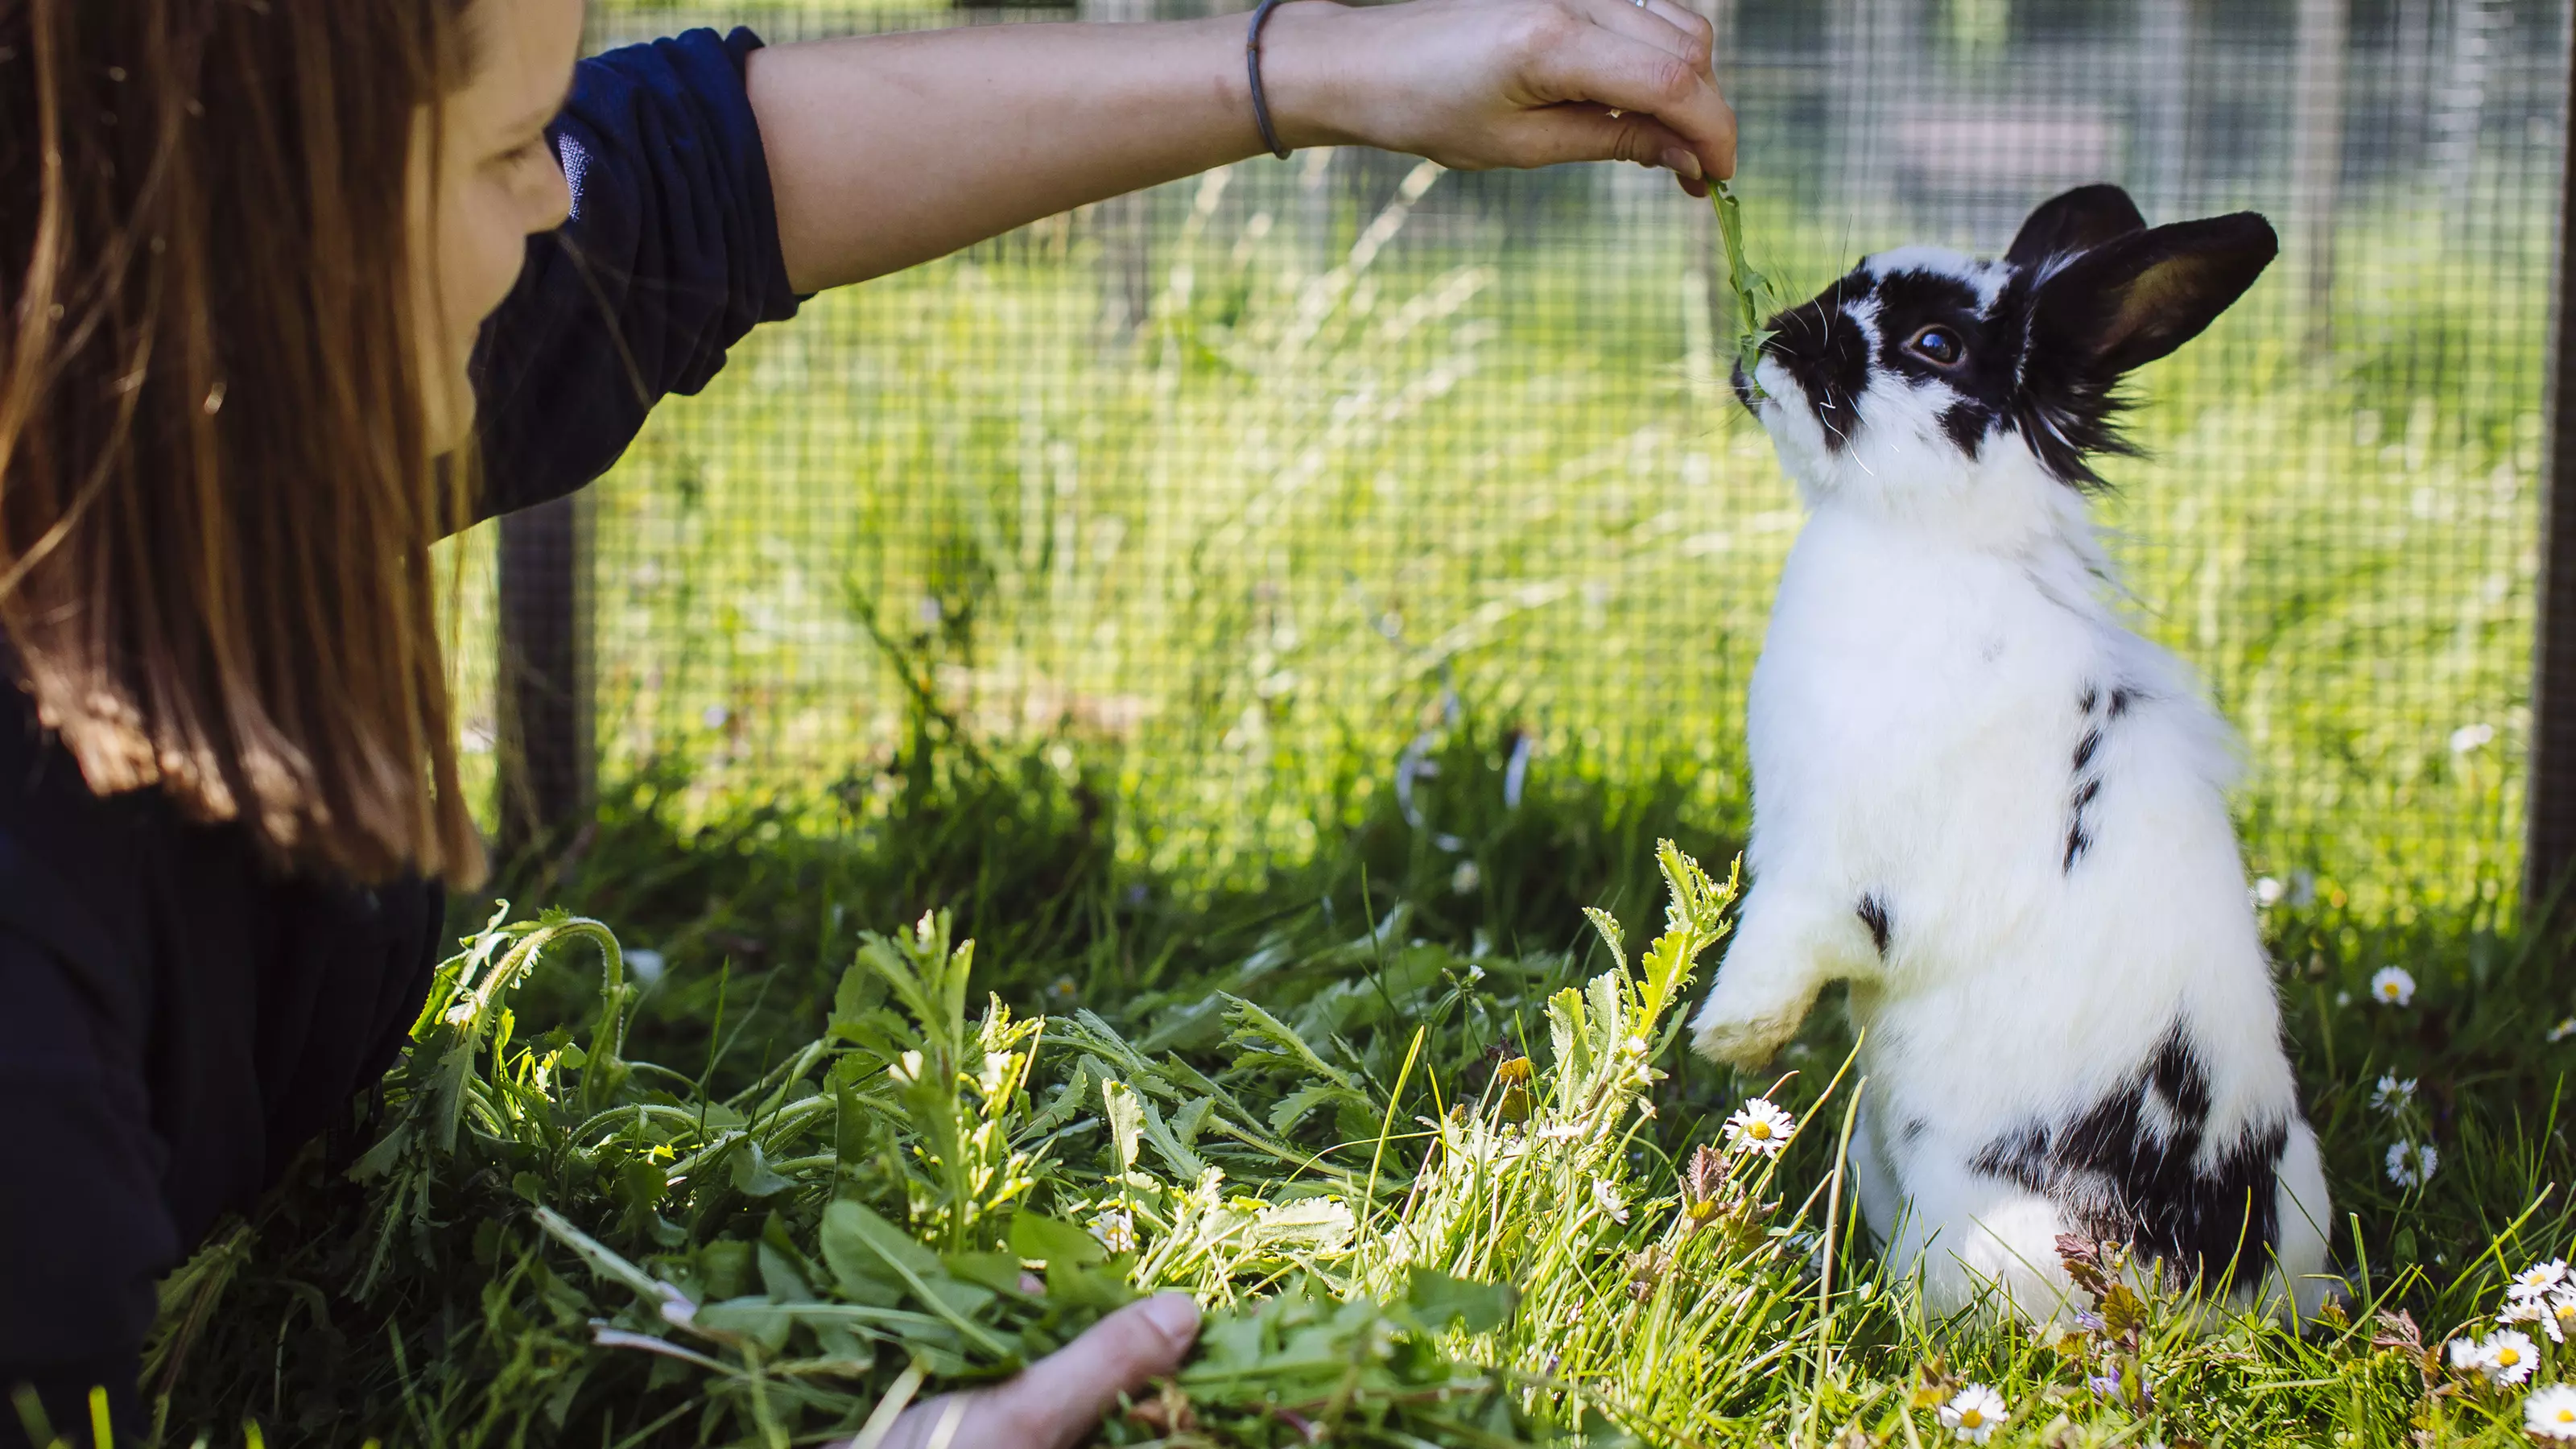 A rabbit on their hind legs reaching up for food from a woman's hand